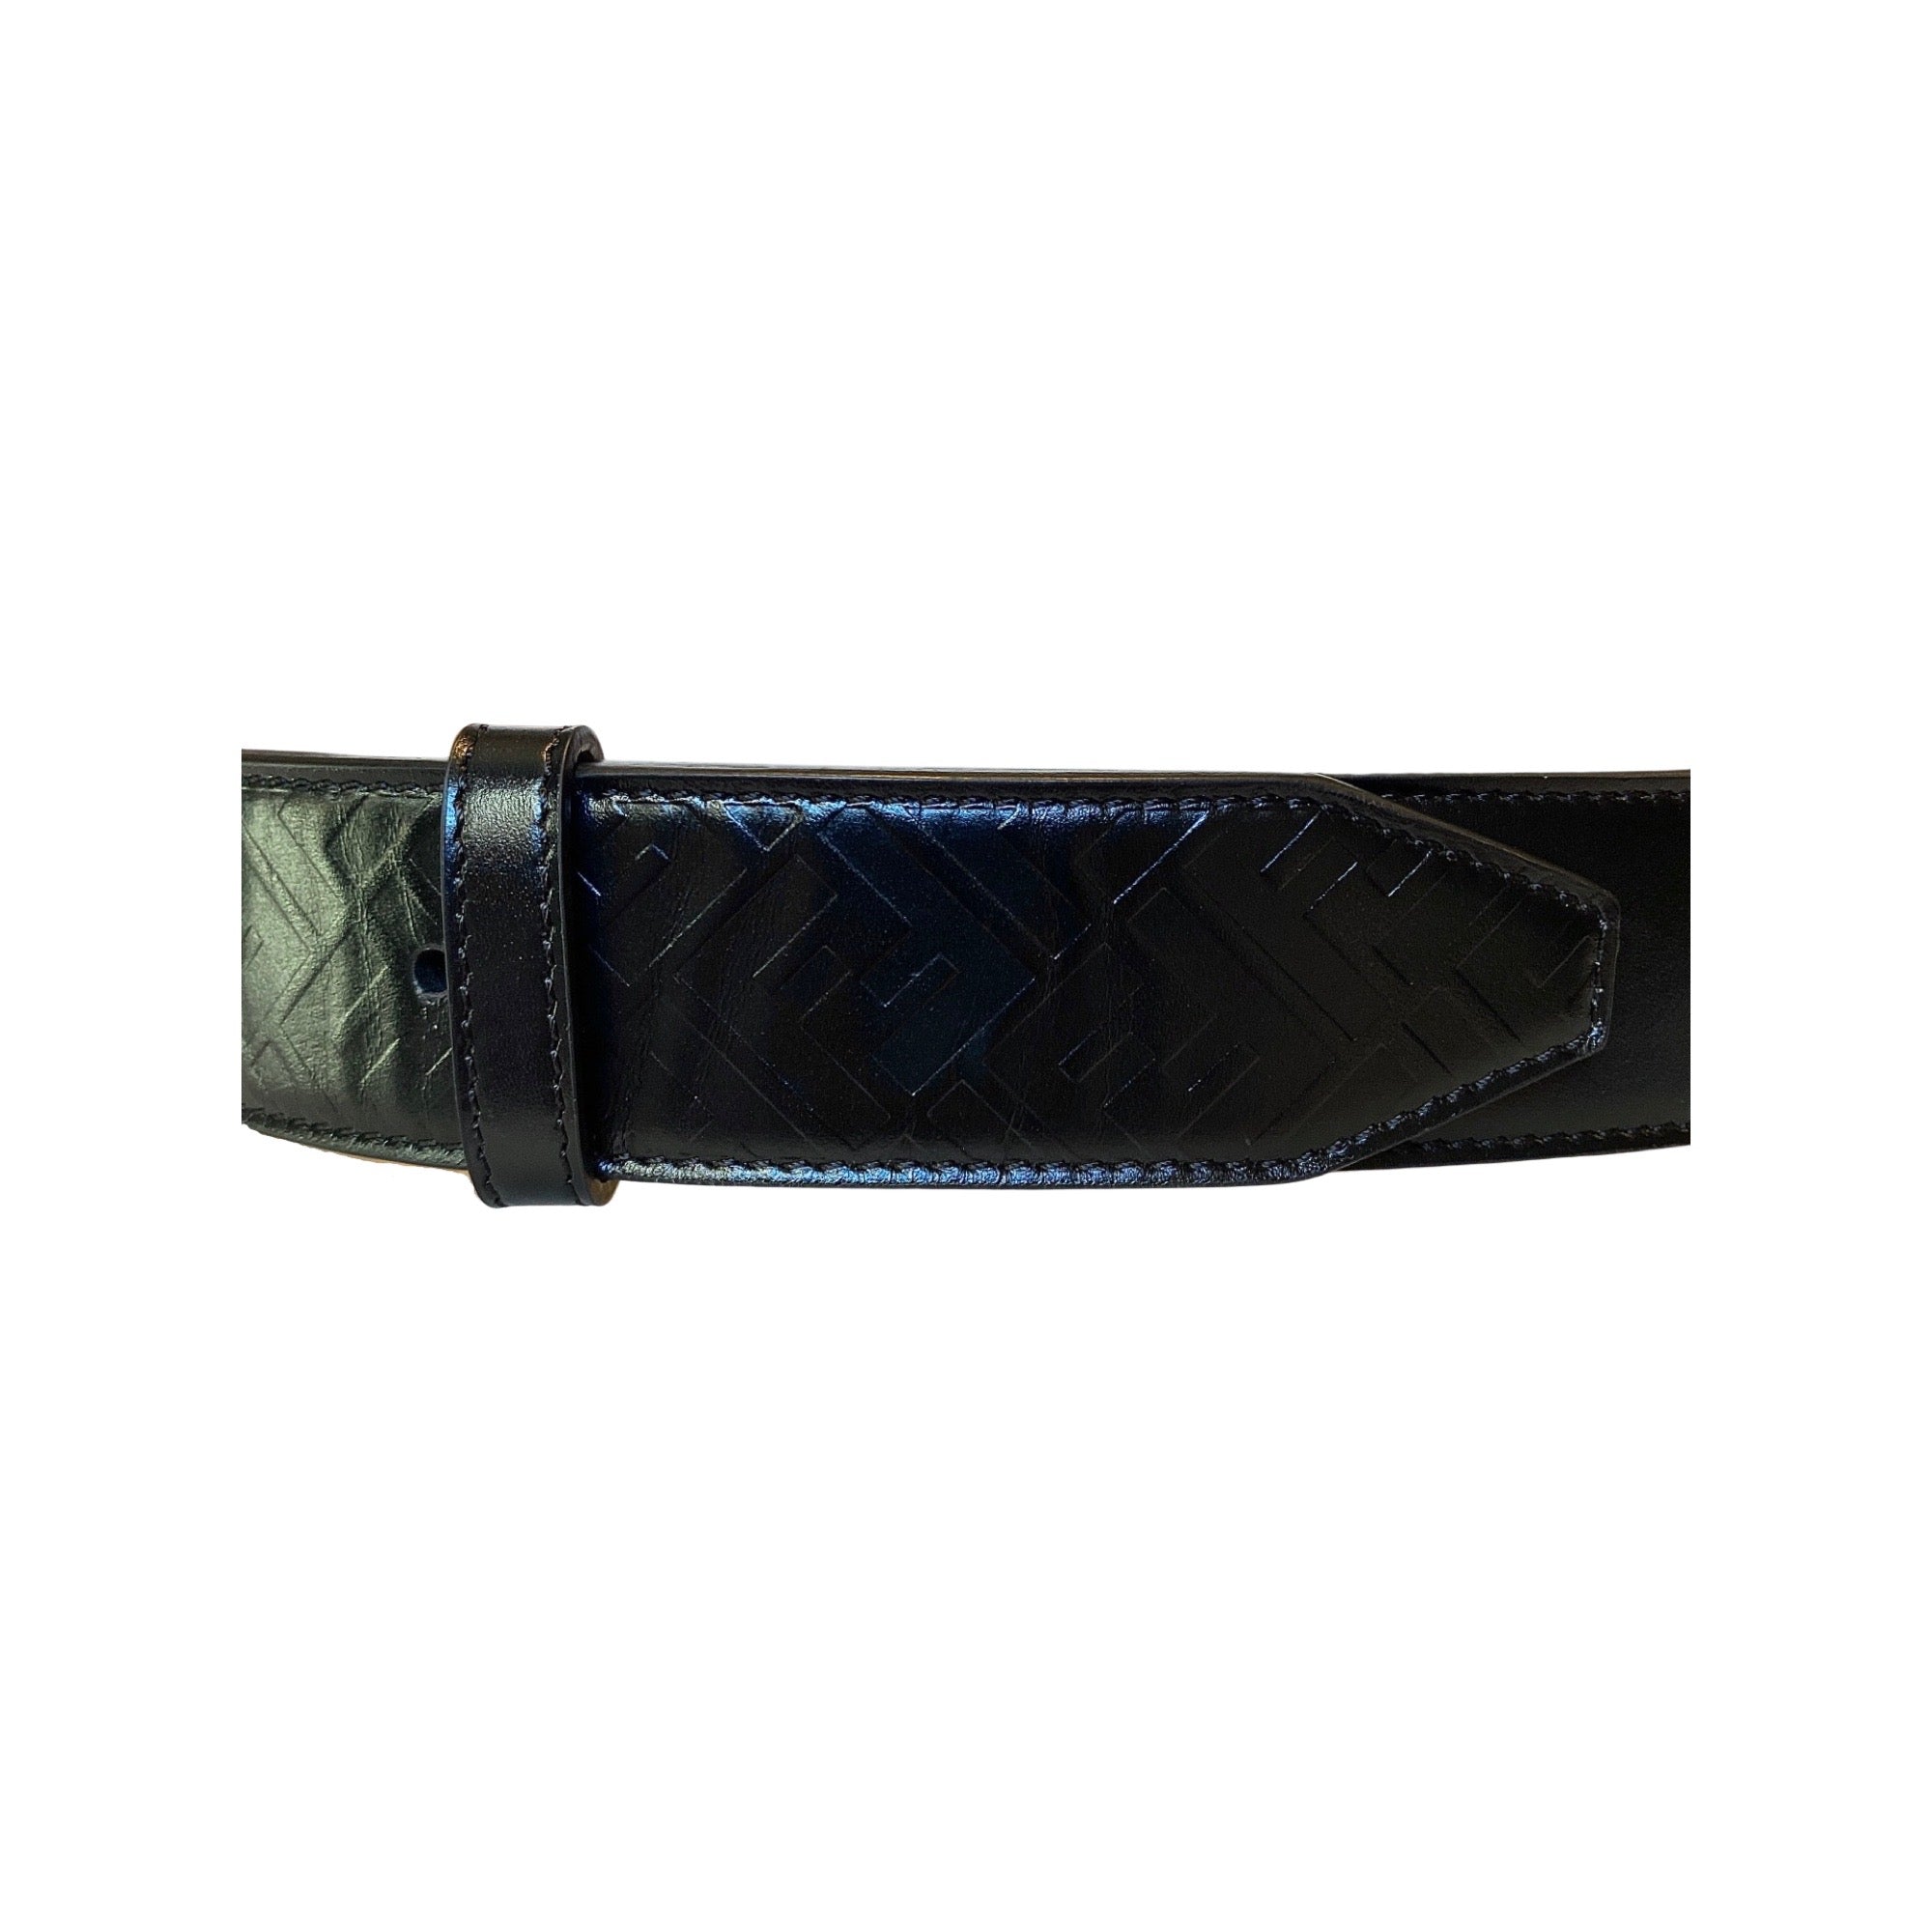 Fendi Silver Buckle Smooth Black Calf Leather Belt 100 7C0434 at_Queen_Bee_of_Beverly_Hills